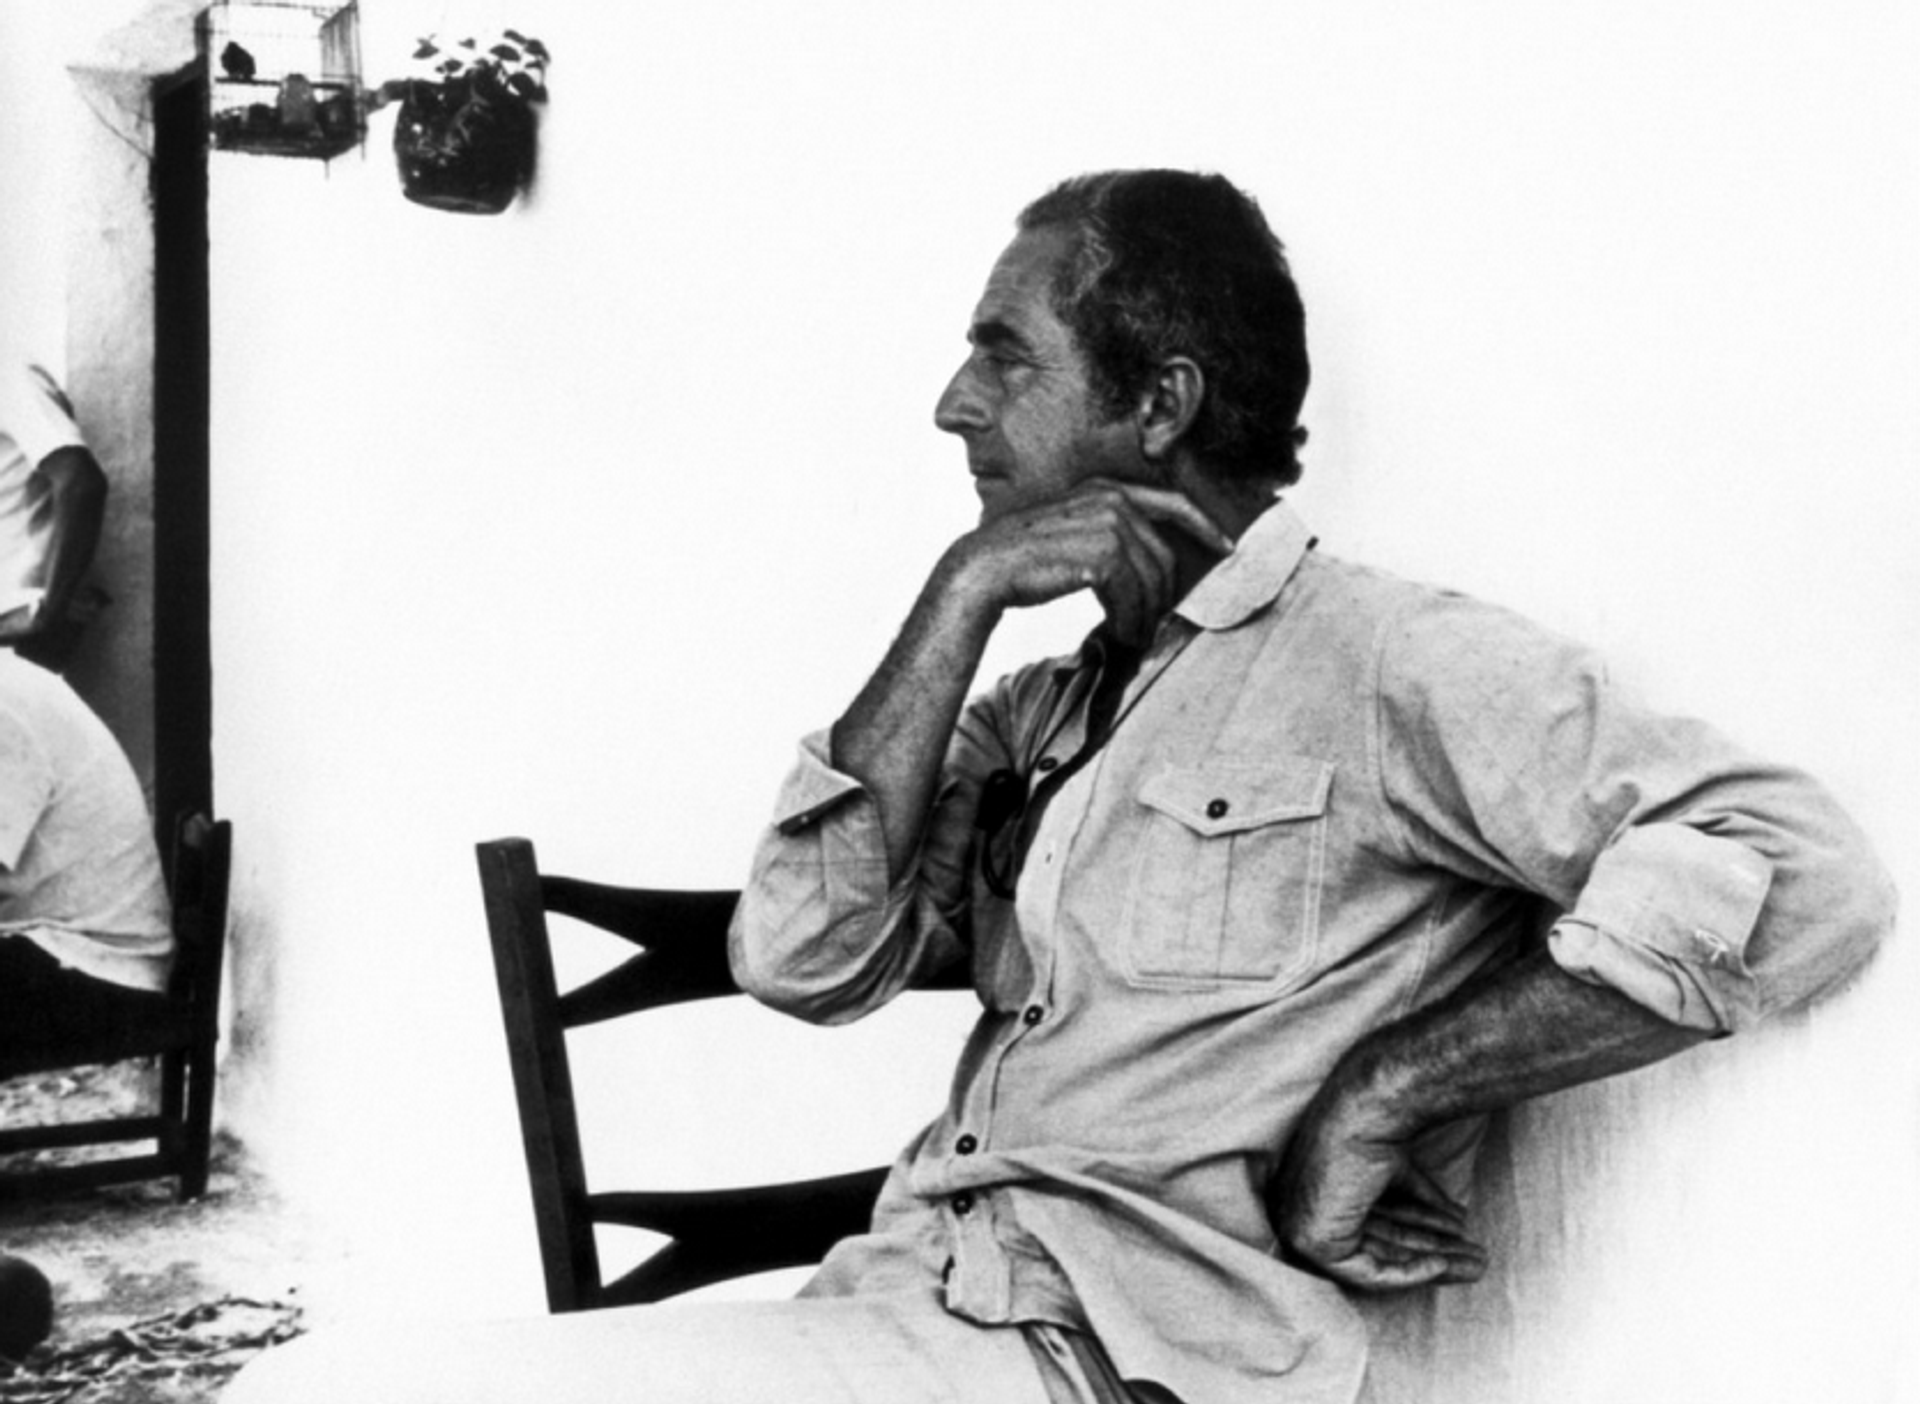 “Now the world is much more important than art.” MICHELANGELO ANTONIONI on the function of art, 1969